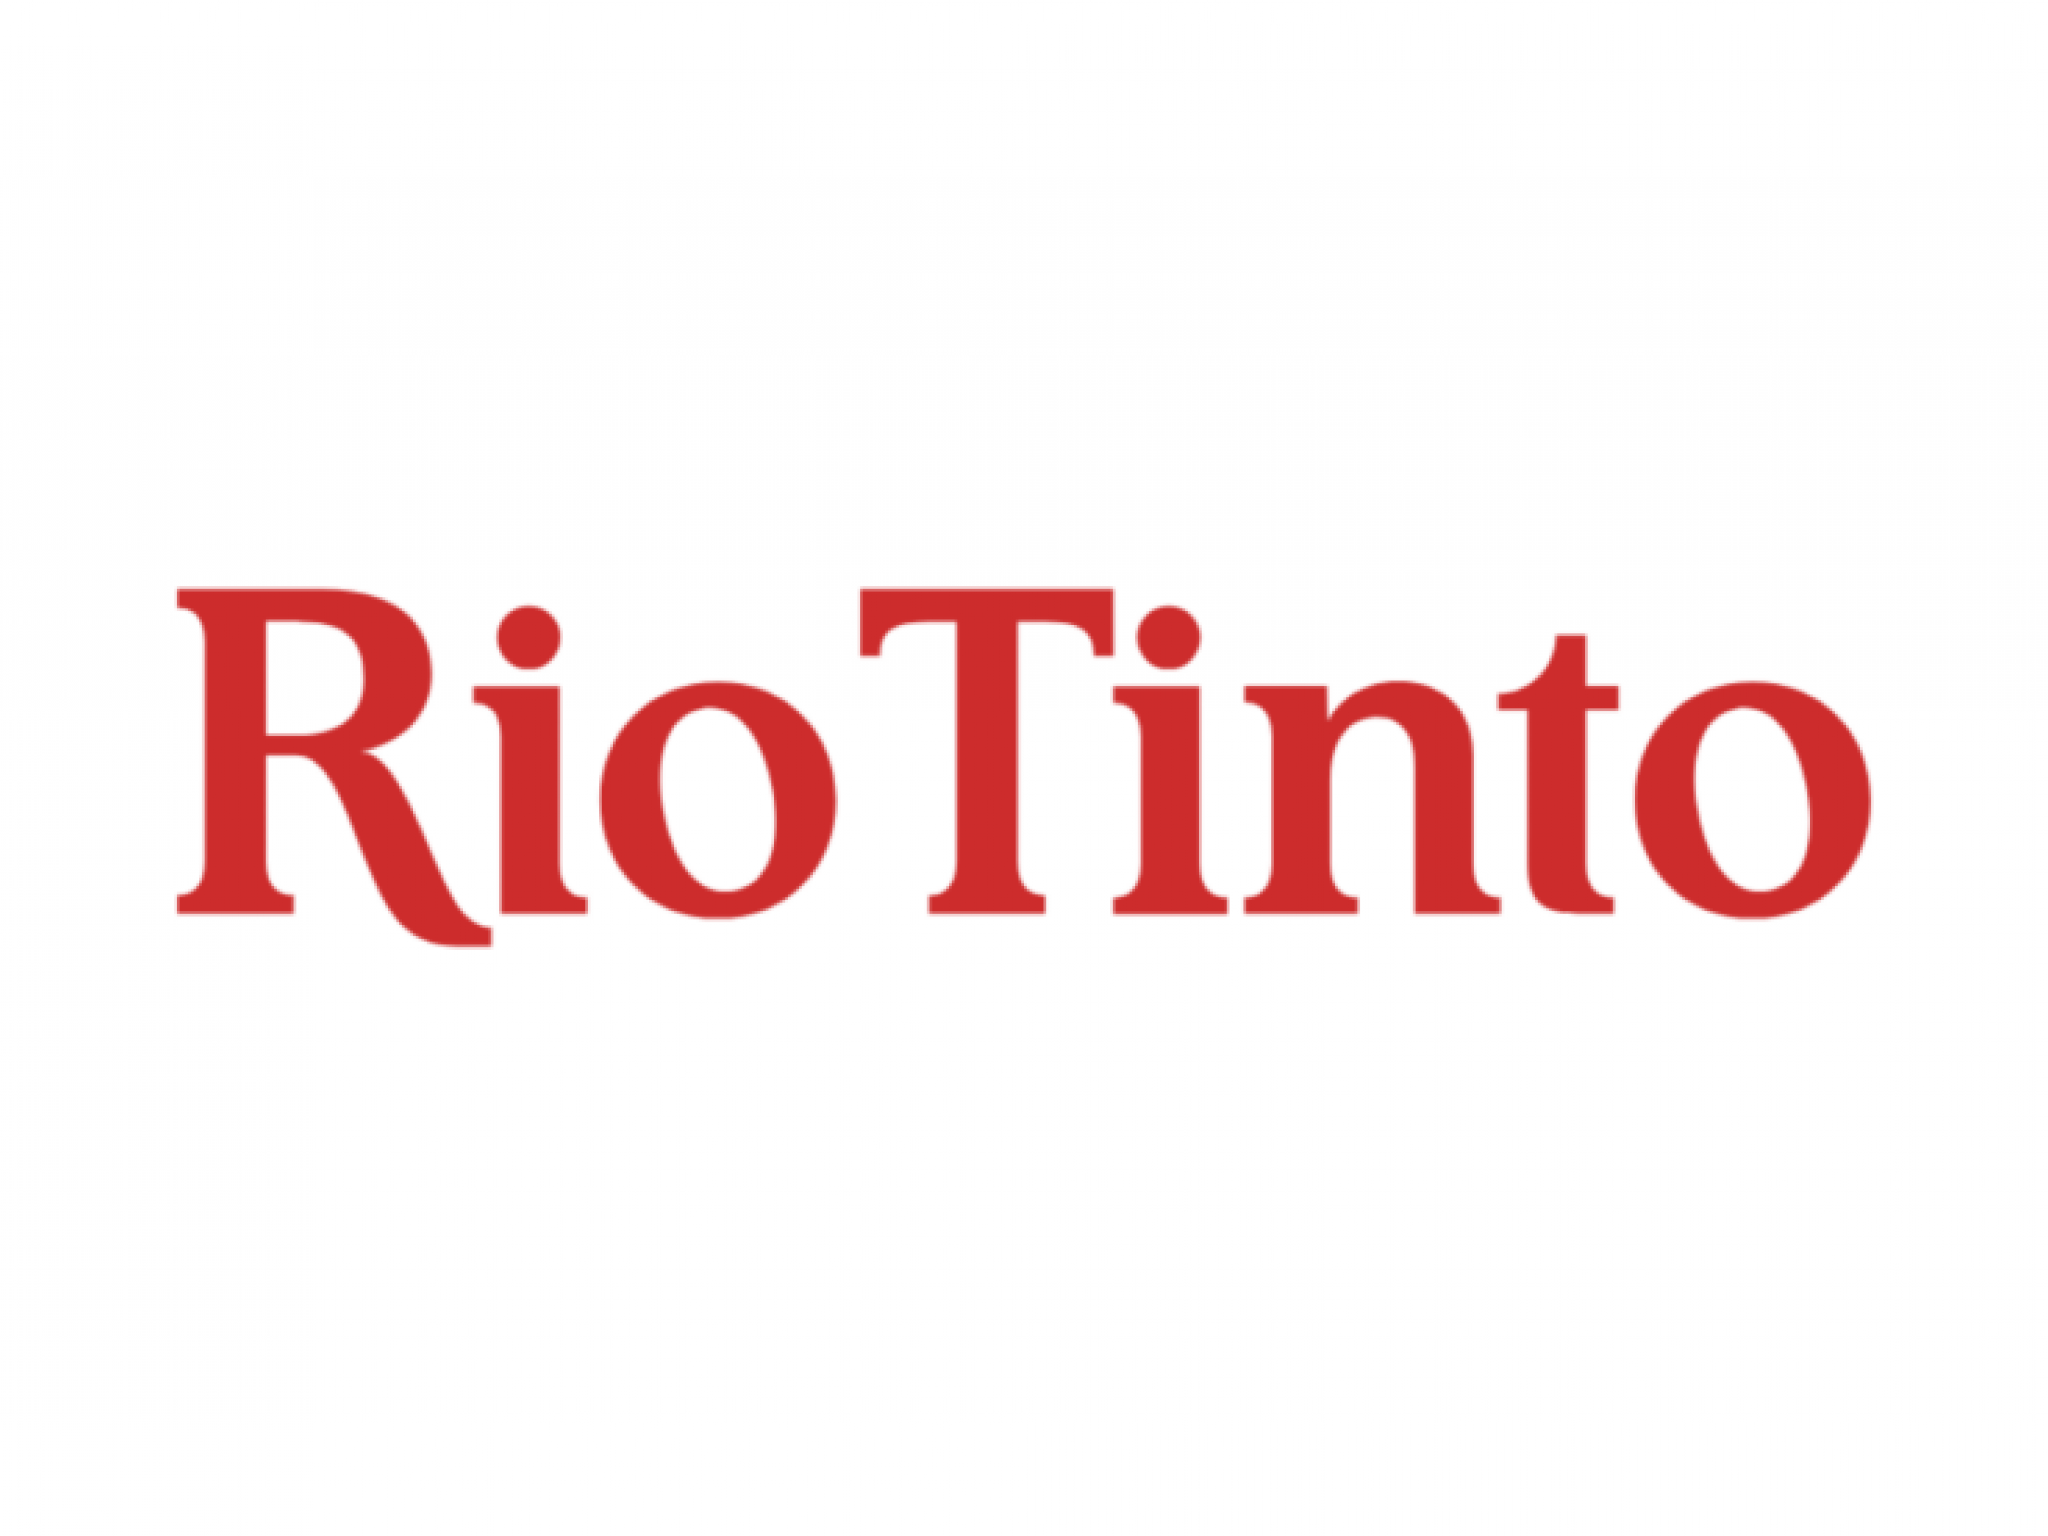  mining-giant-rio-tinto-caught-into-water-nightmare-at-two-mines-report 